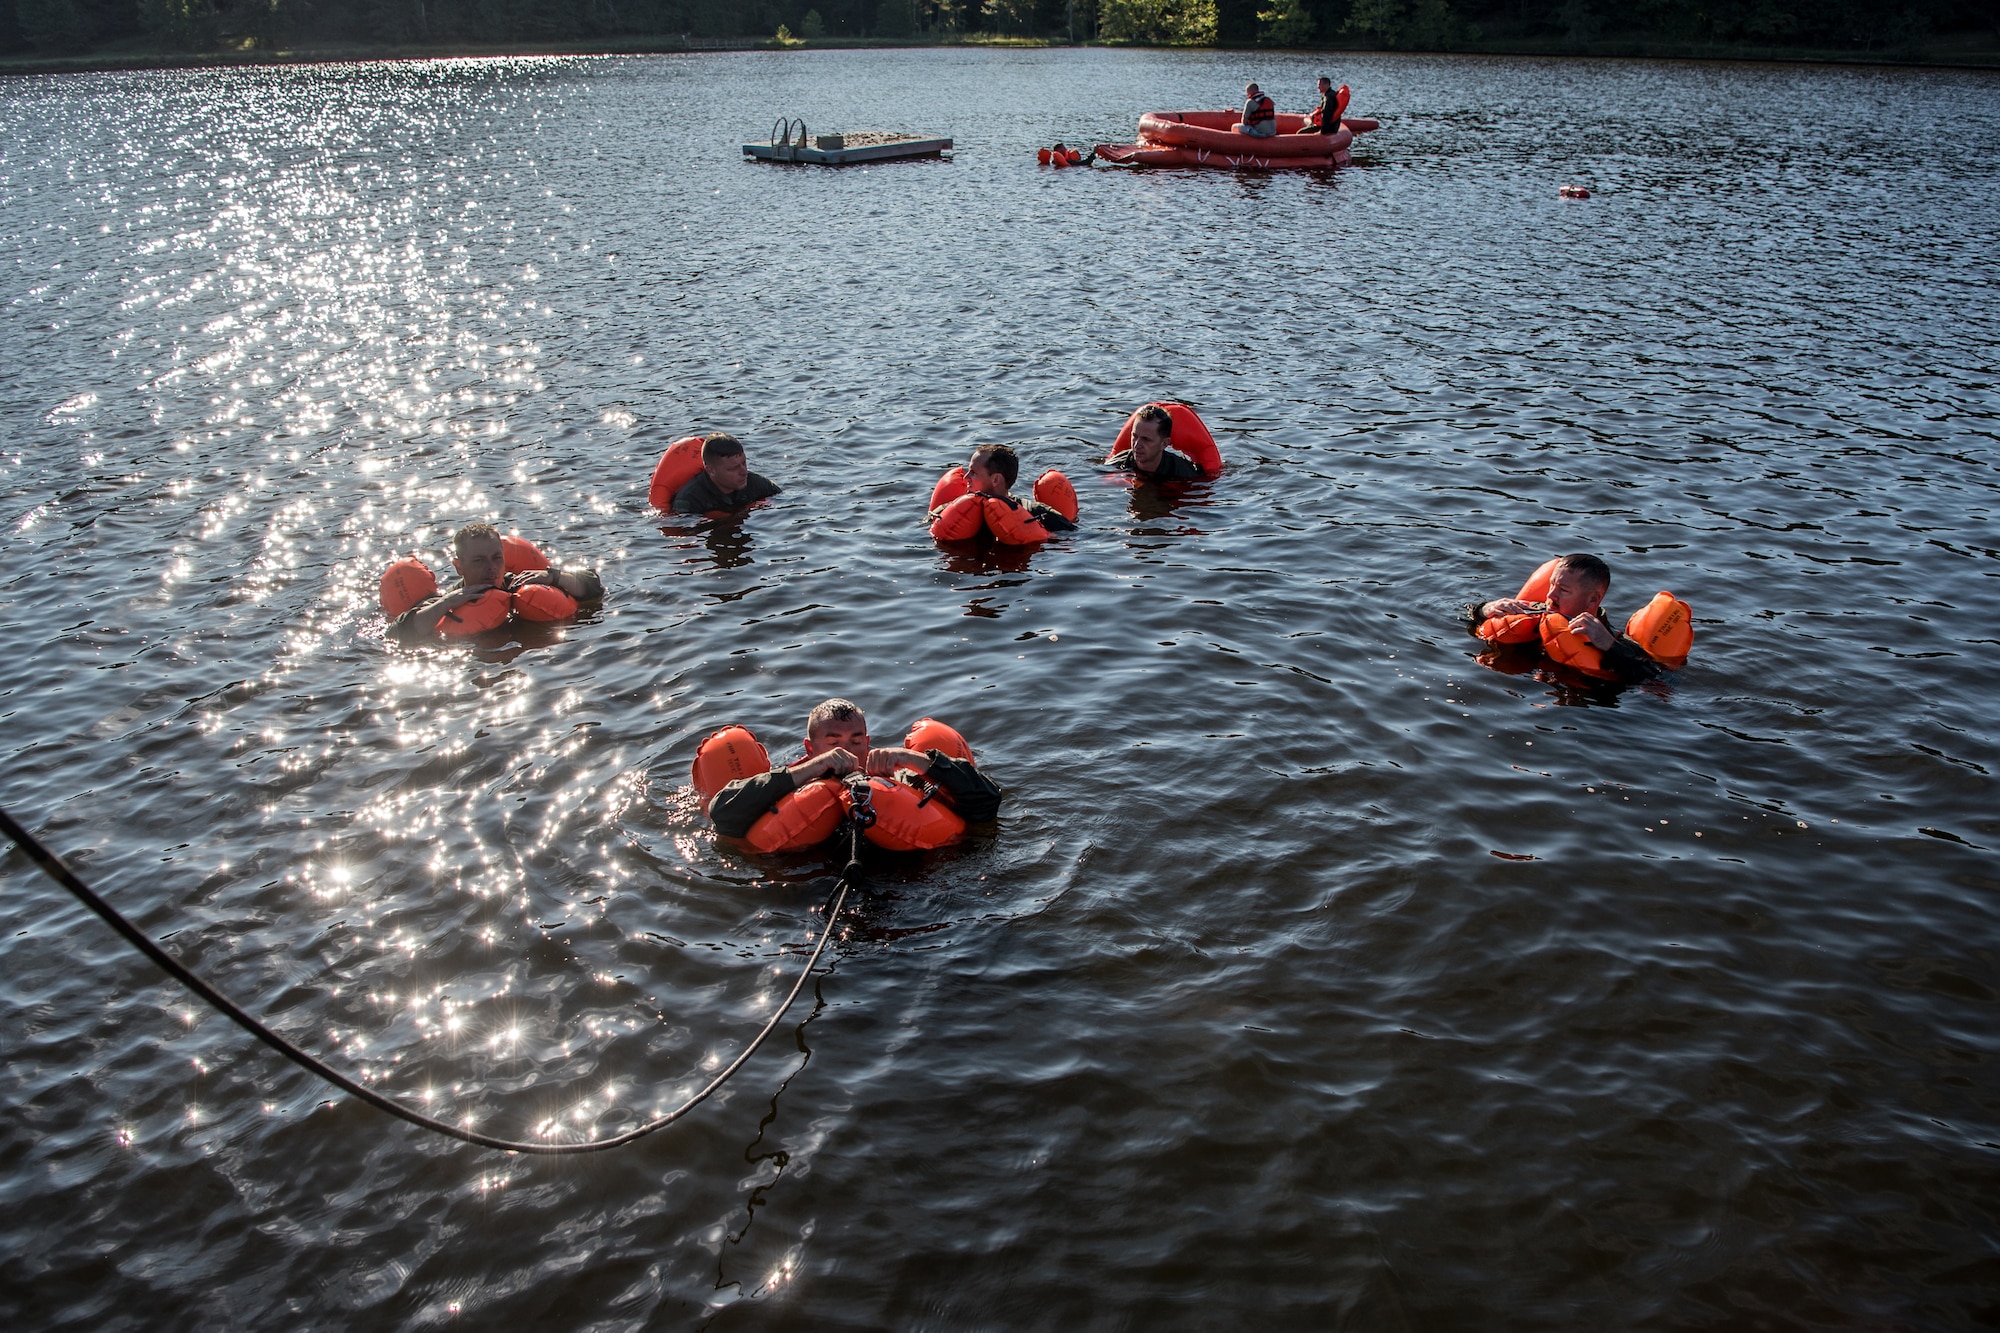 Aircrew members from the Kentucky Air National Guard’s 123rd Airlift Wing are pulled to land after extricating themselves from underneath a floating parachute during water survival training at Camp Crooked Creek in Shepherdsville, Ky., Sept. 14, 2019. The training also covered land survival techniques and orienteering. (U.S. Air National Guard photo by Staff Sgt. Joshua Horton)